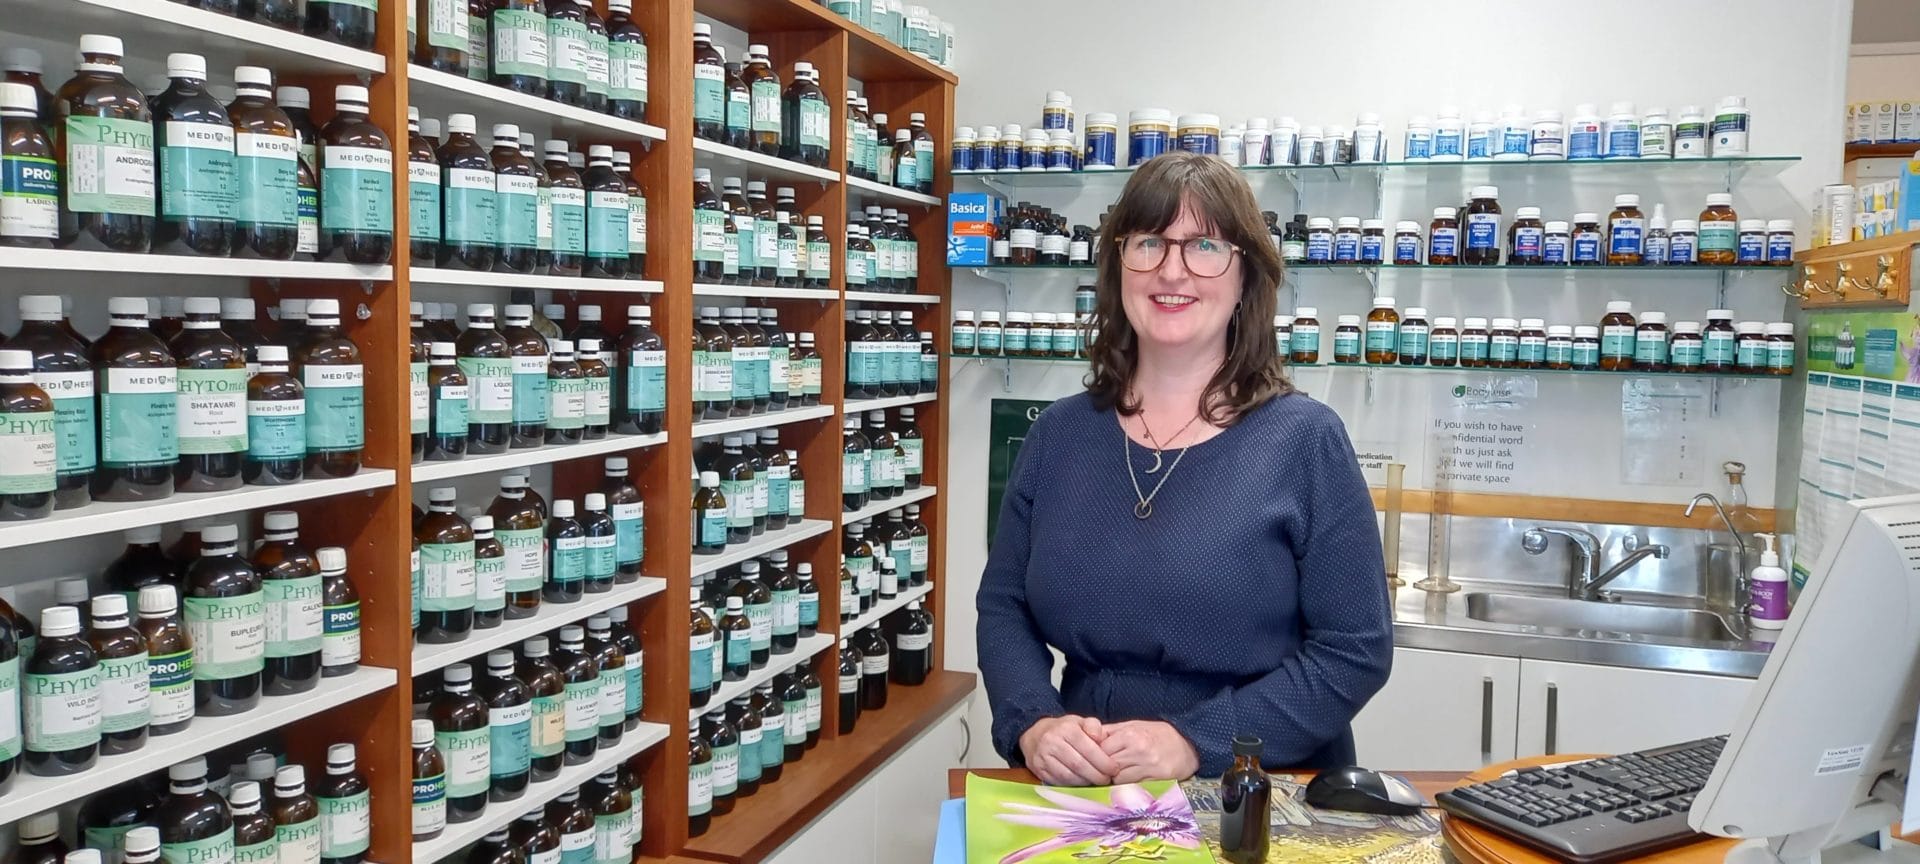 Collen Davies, Naturopath and Medical Herbalist at Bodywise